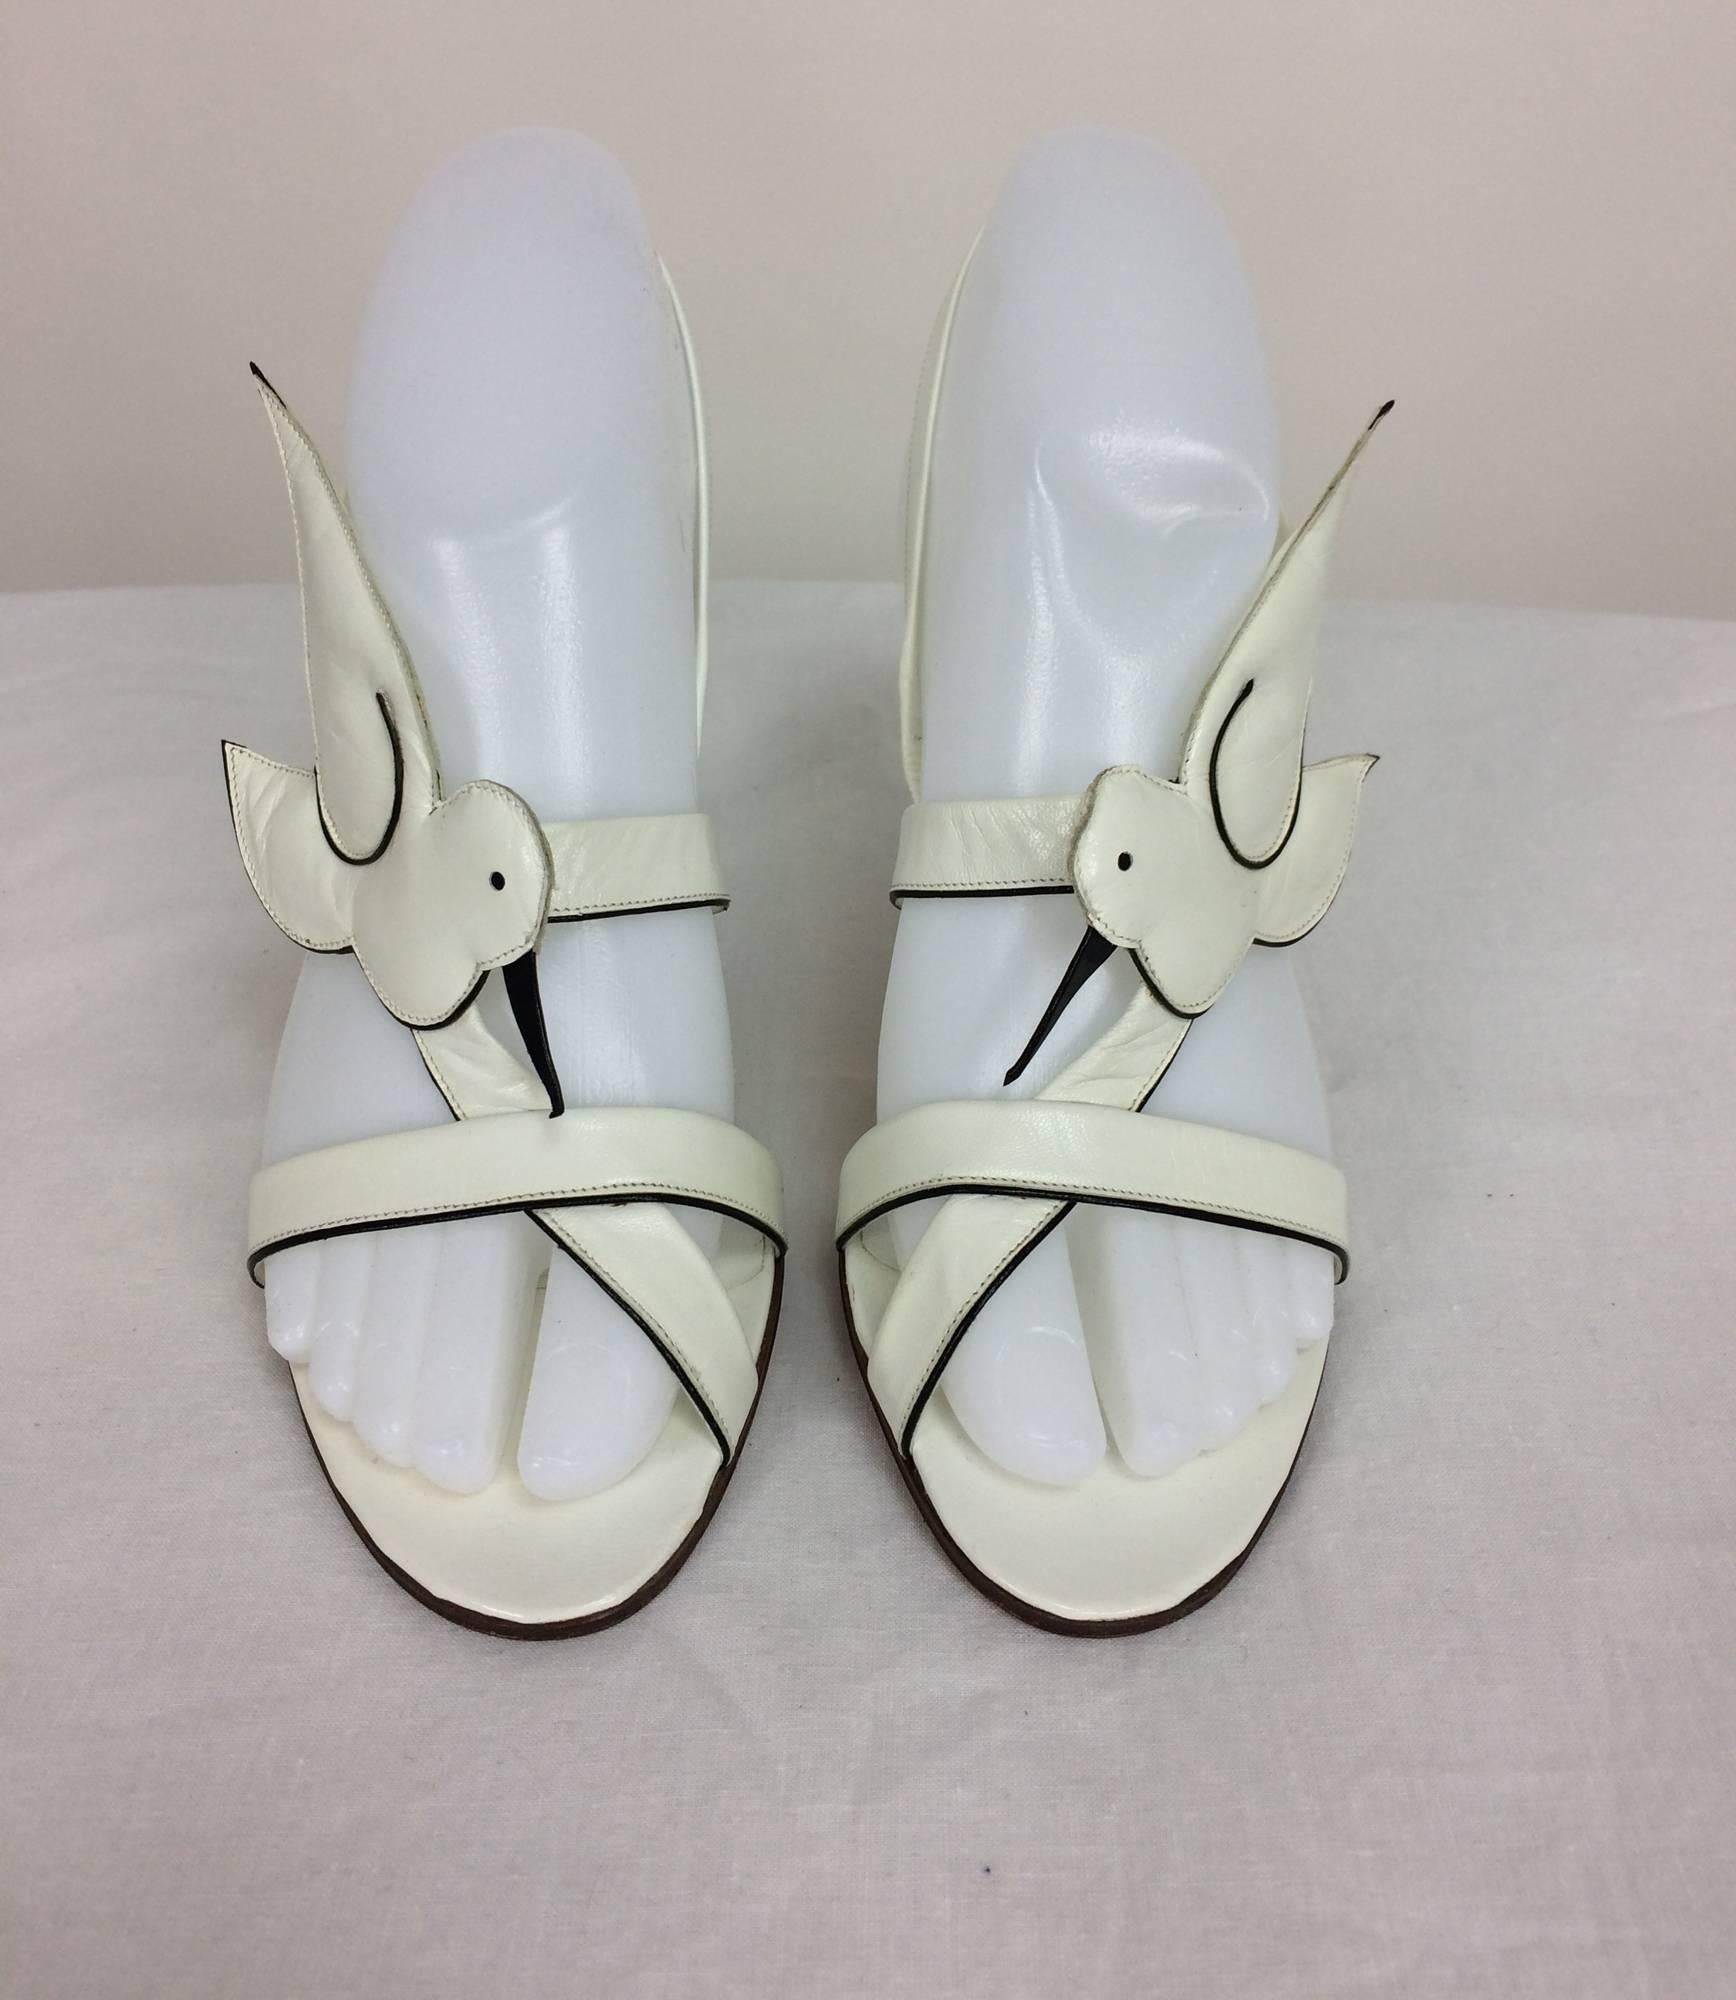 Roger Vivier white leather winged birds sandals unworn 37 1/2M...Amazing shoes...Please see the last 2 photos the small piece of leather covered elastic at each side is cracked near the sole, it would be impossible to see when worn...